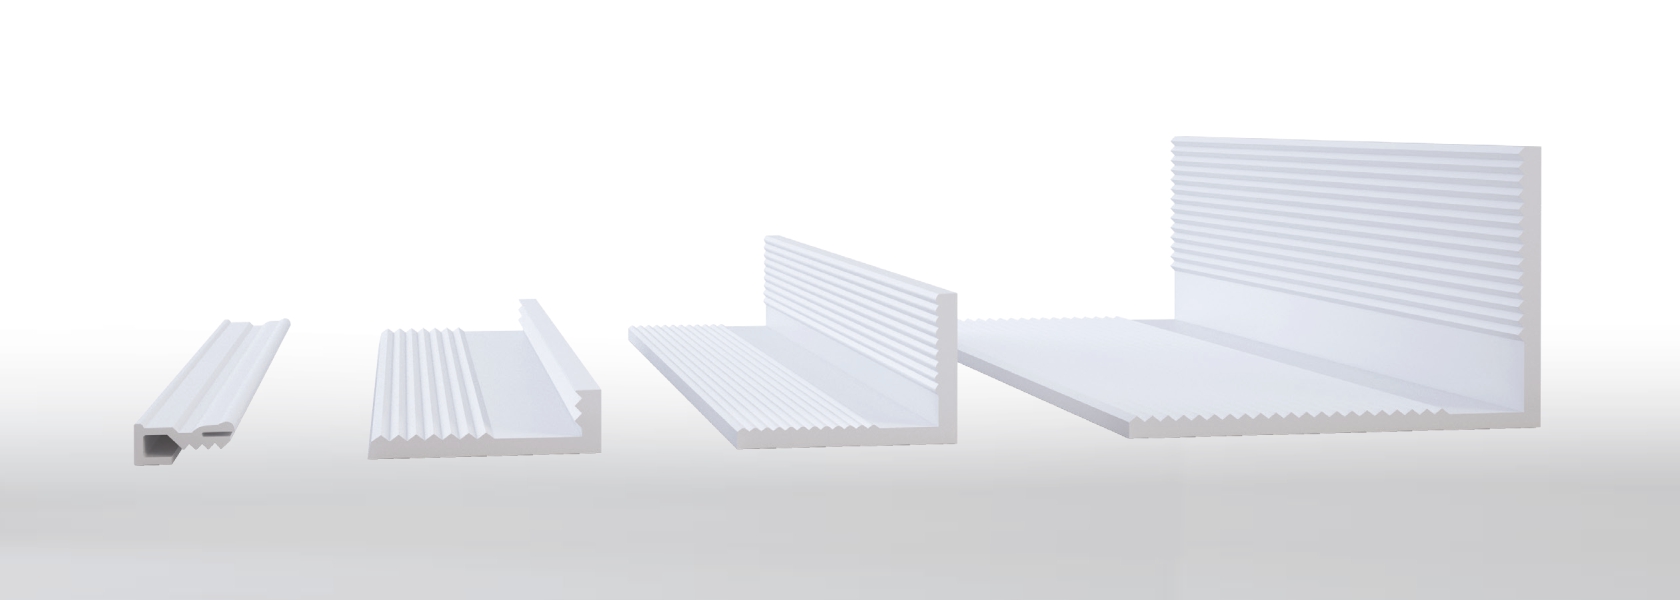 Additional Veka profiles and accessories